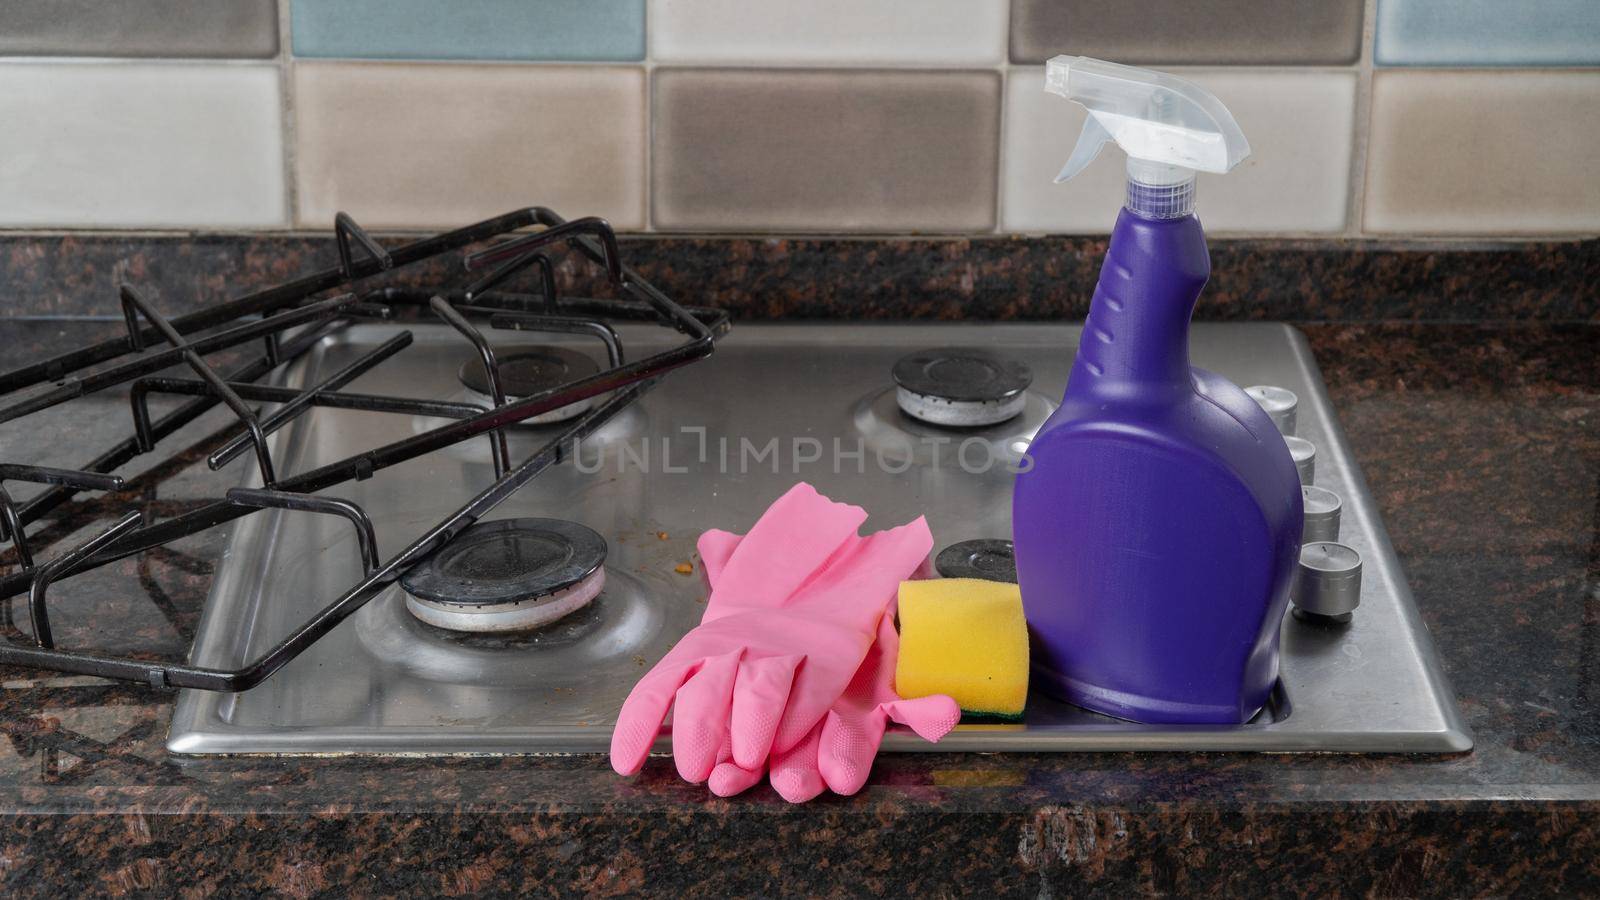 Washing kit rubber gloves, sponge, detergent on the gas stove in the kitchen